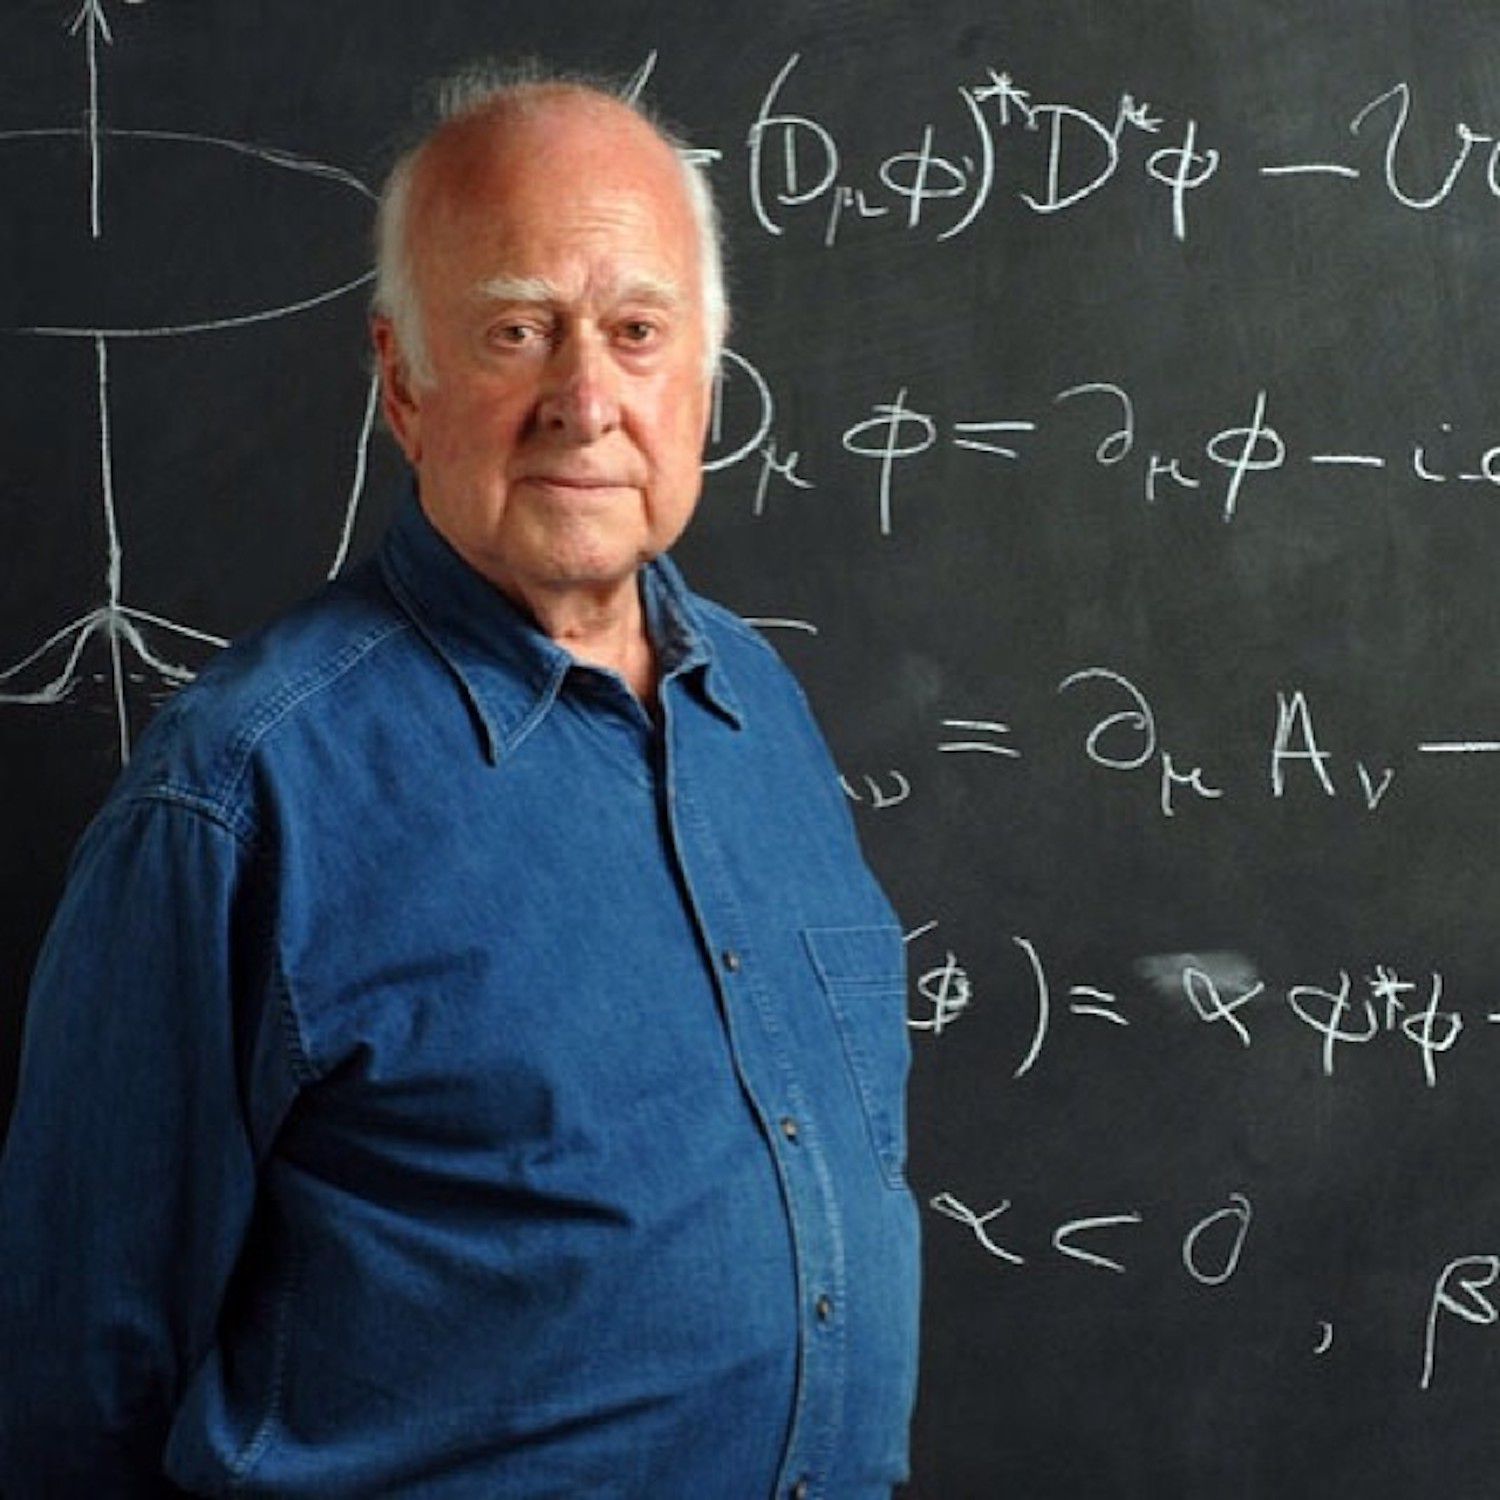 The Discovery of the Higgs Field